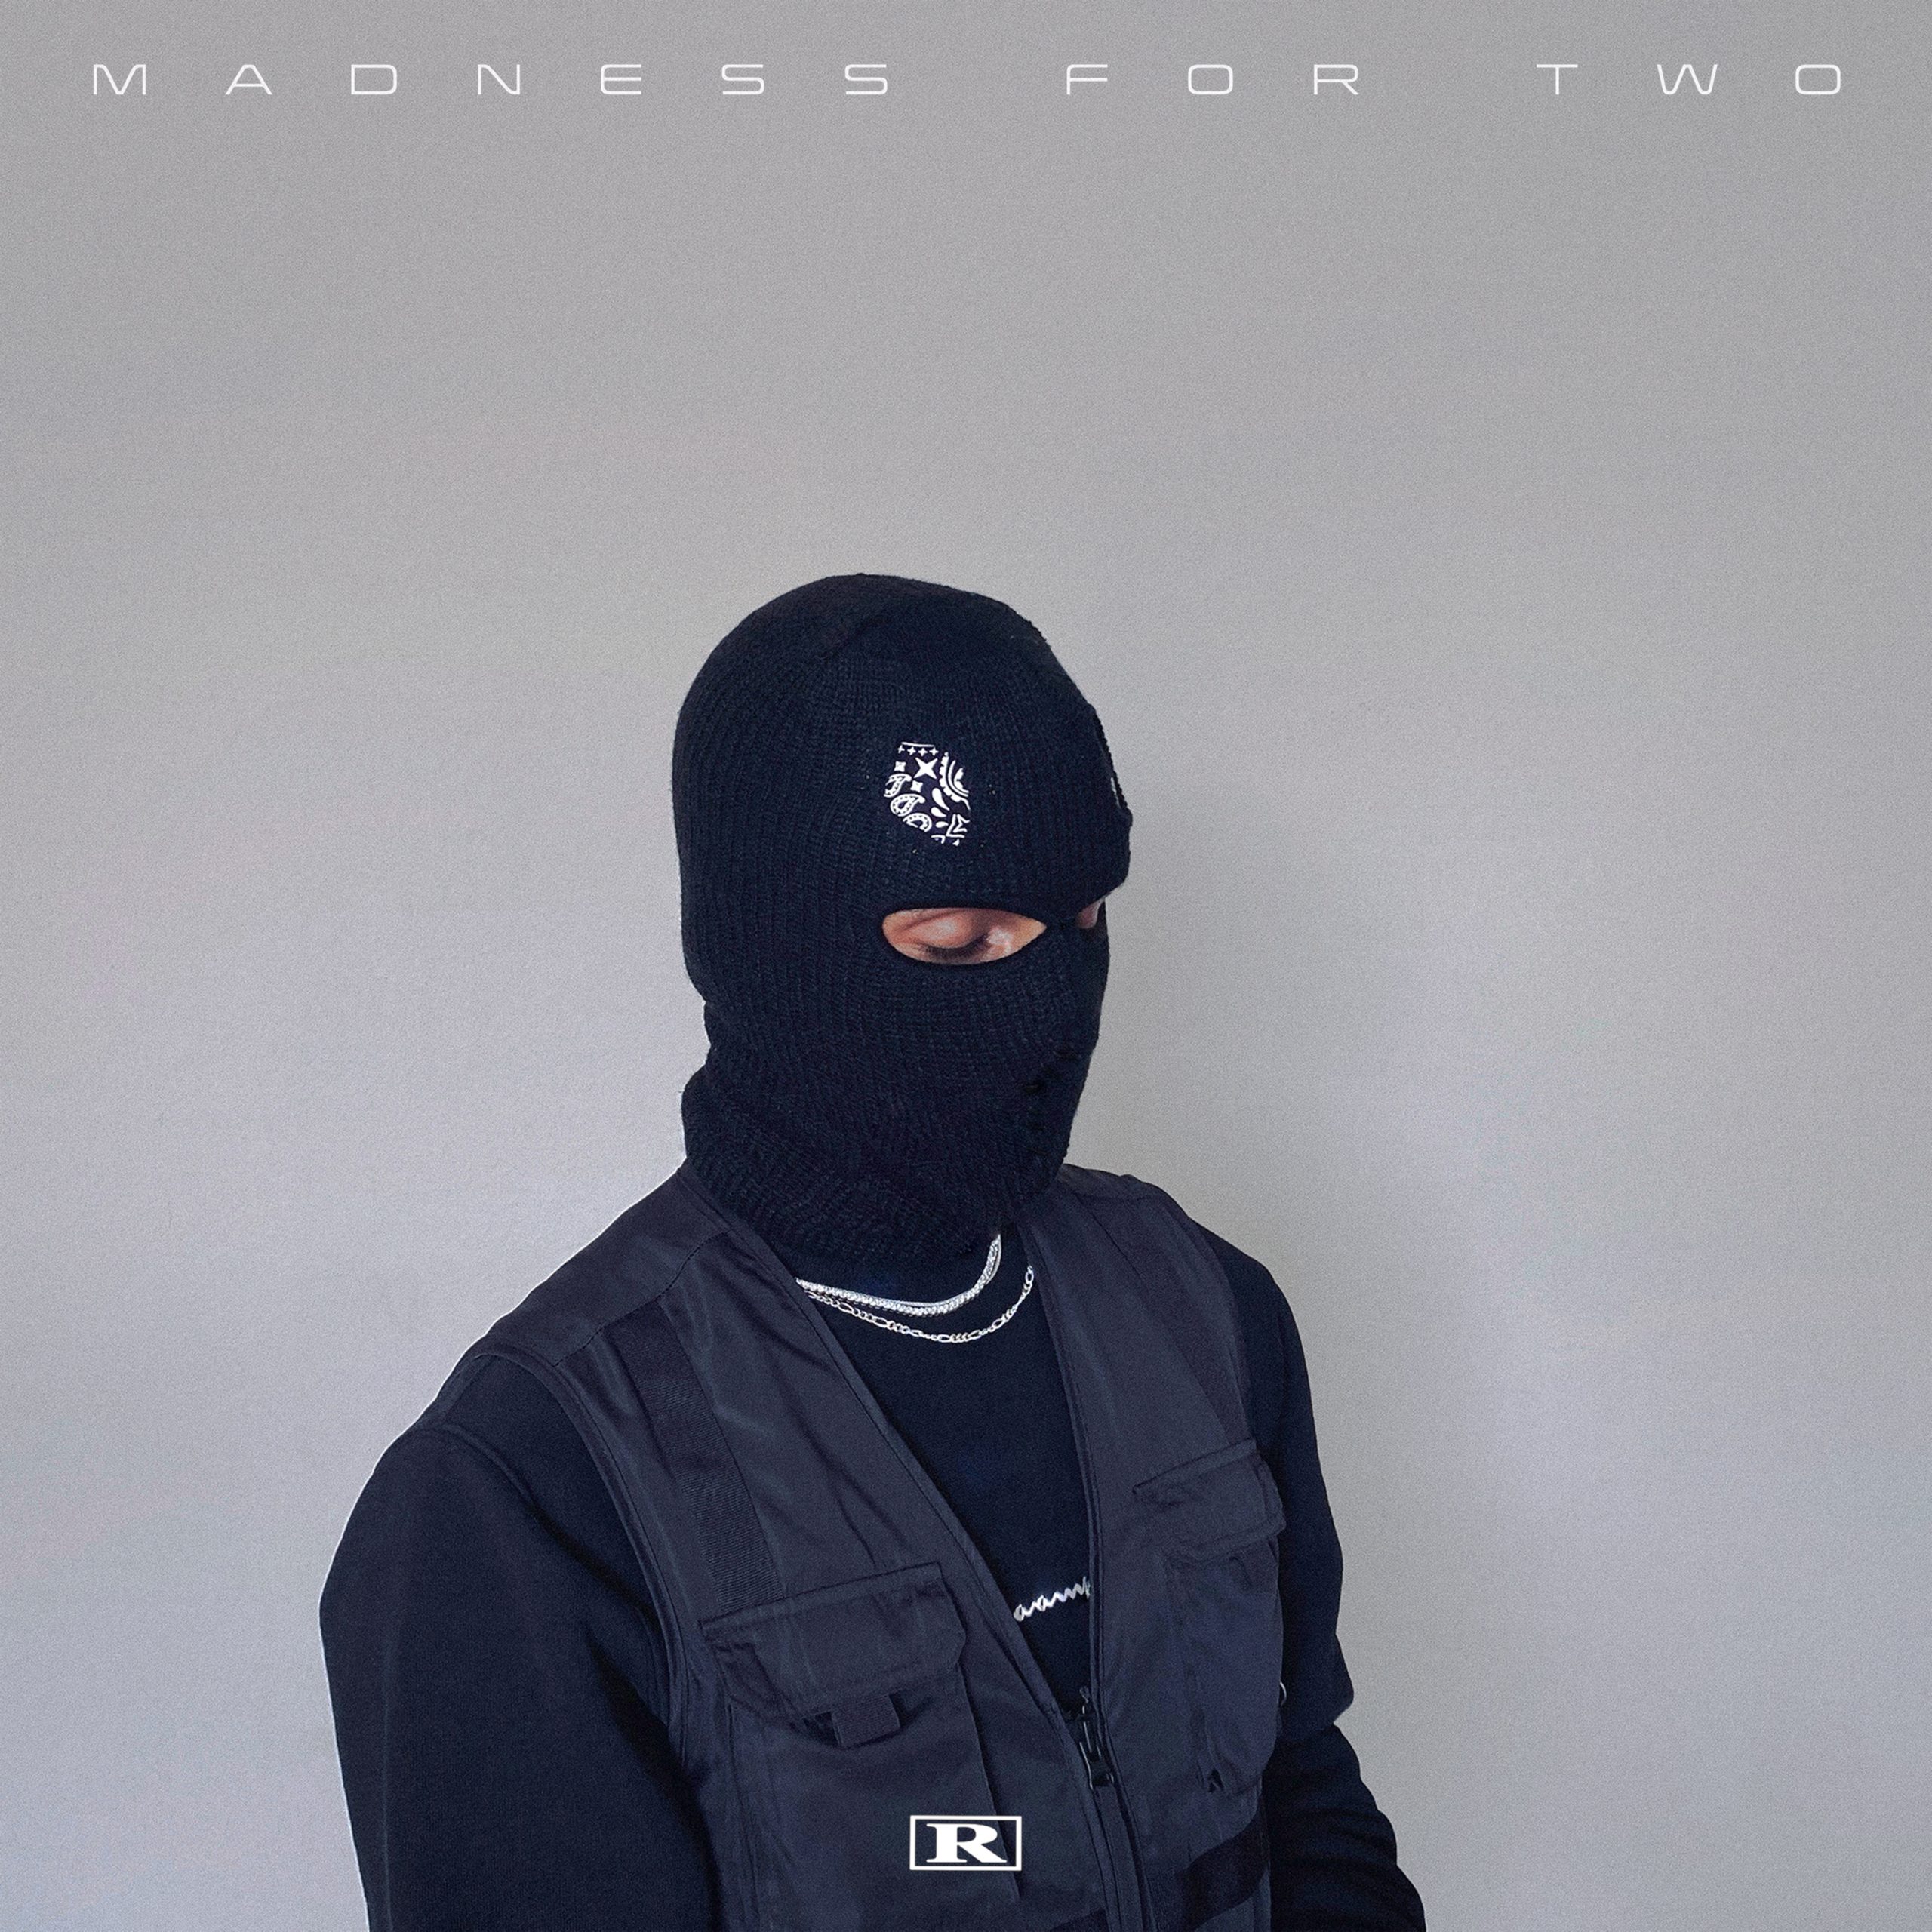 Adam Nabeel releases sophomore EP "Madness For Two"